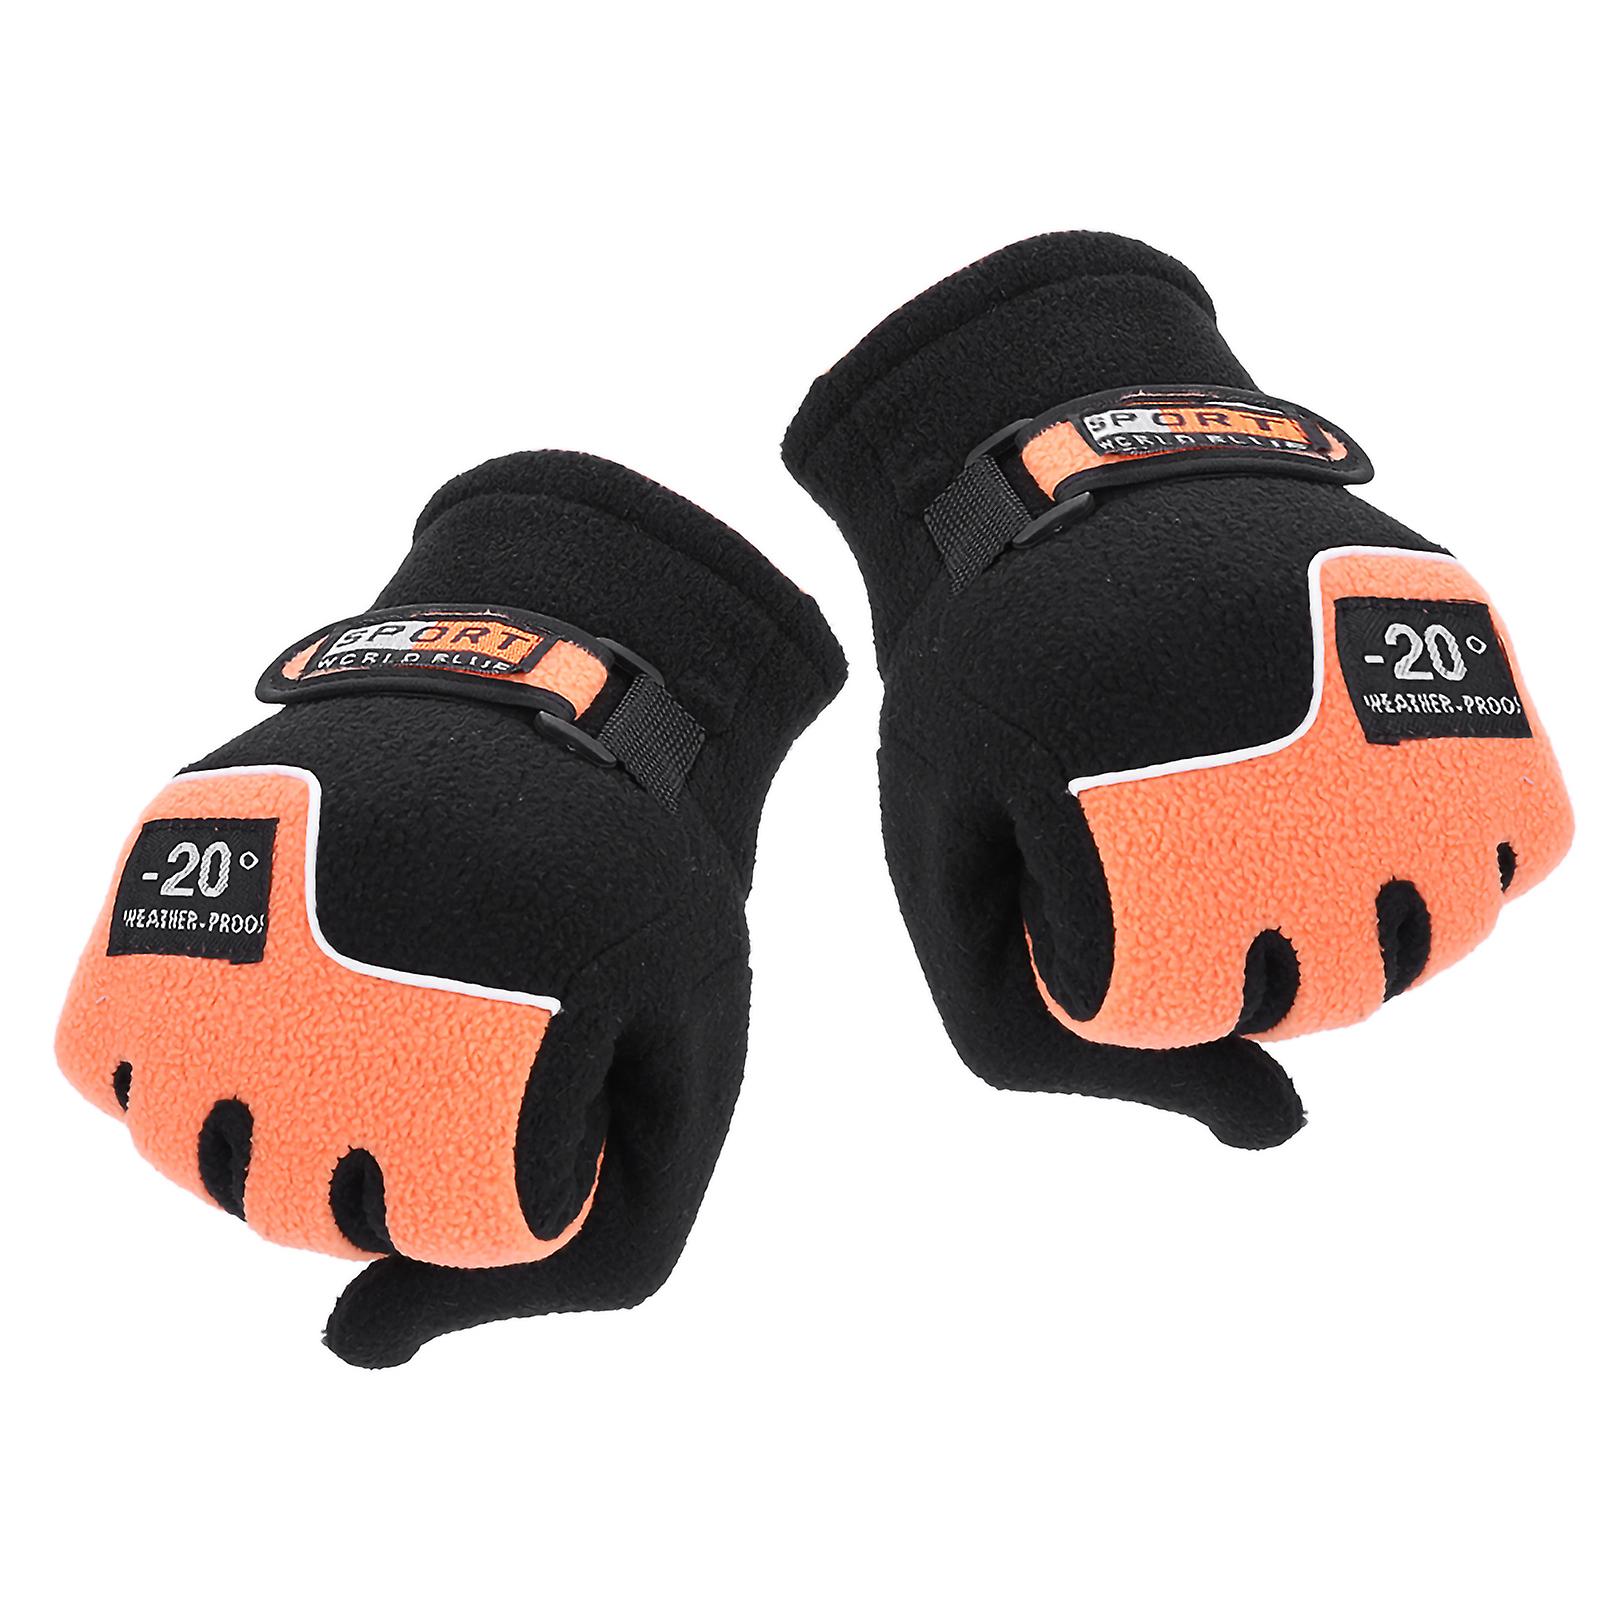 1 Pair Winter Windproof Warm Full Finger Glove For Outdoor Skiing Cycling Sports(women Orange)